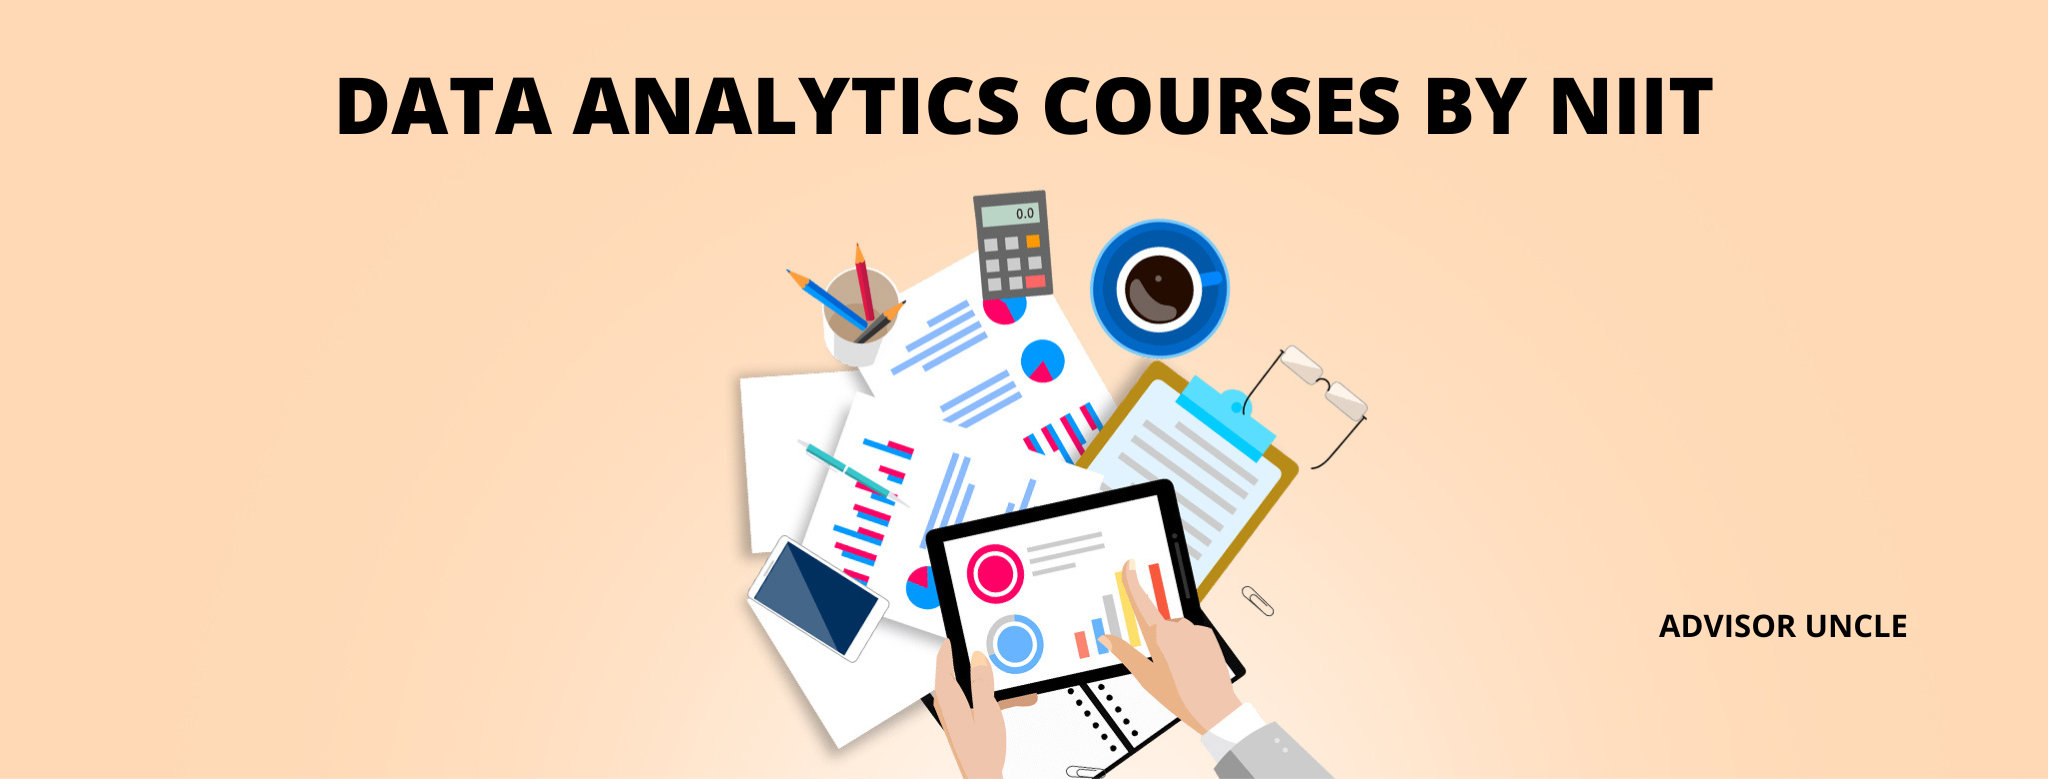 A guide to data analytics courses by NIIT